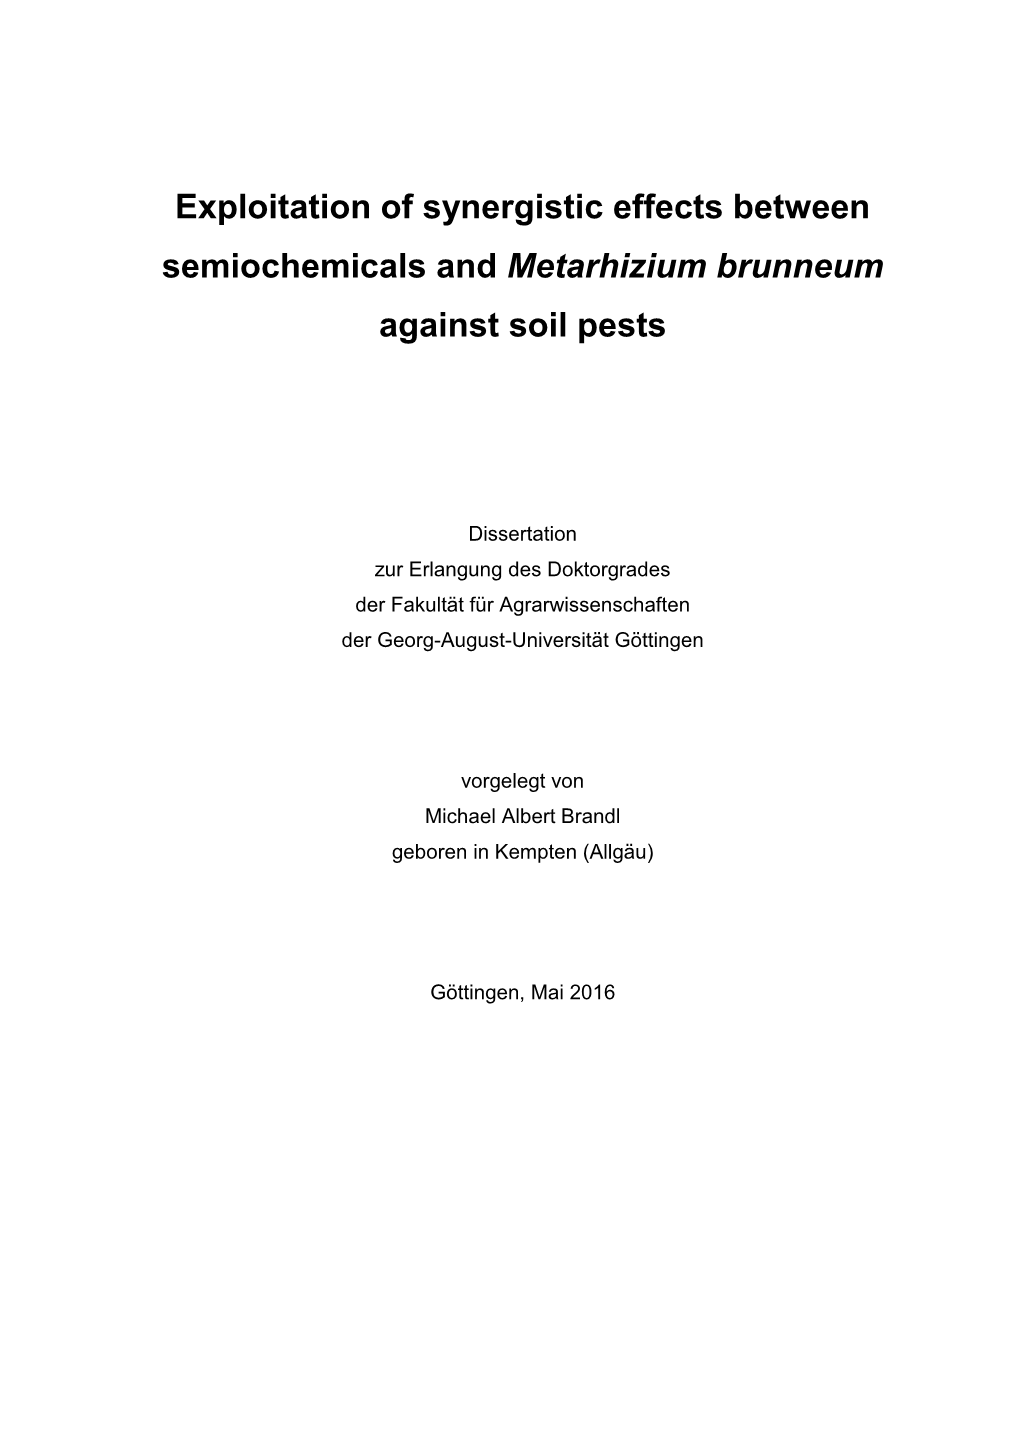 Exploitation of Synergistic Effects Between Semiochemicals and Metarhizium Brunneum Against Soil Pests